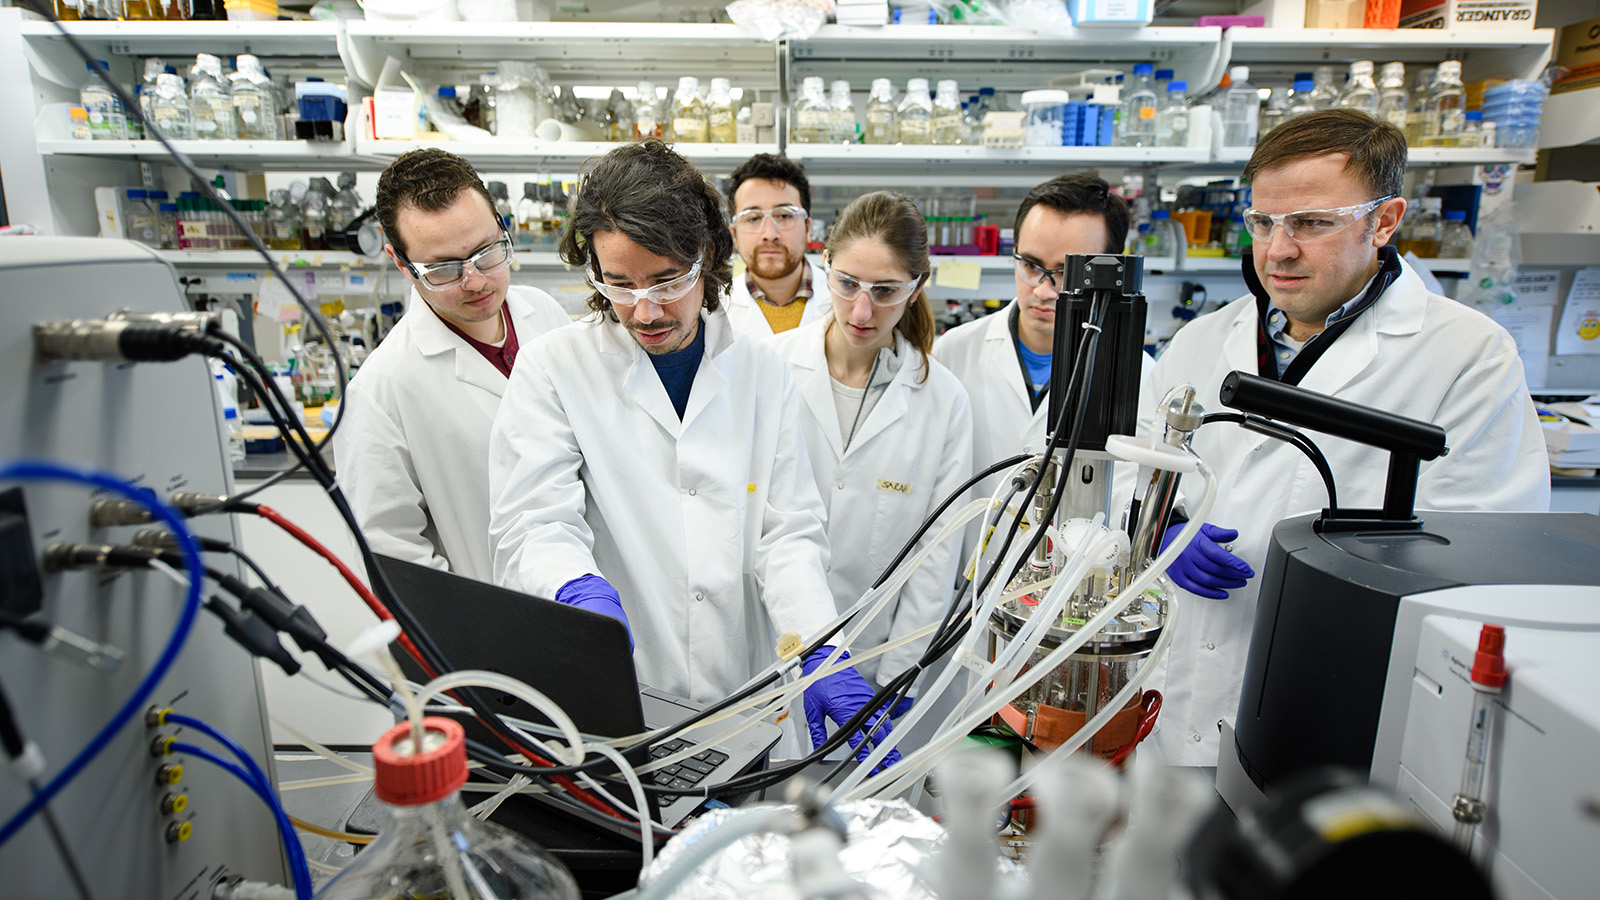 Six researchers look at equipment in lab